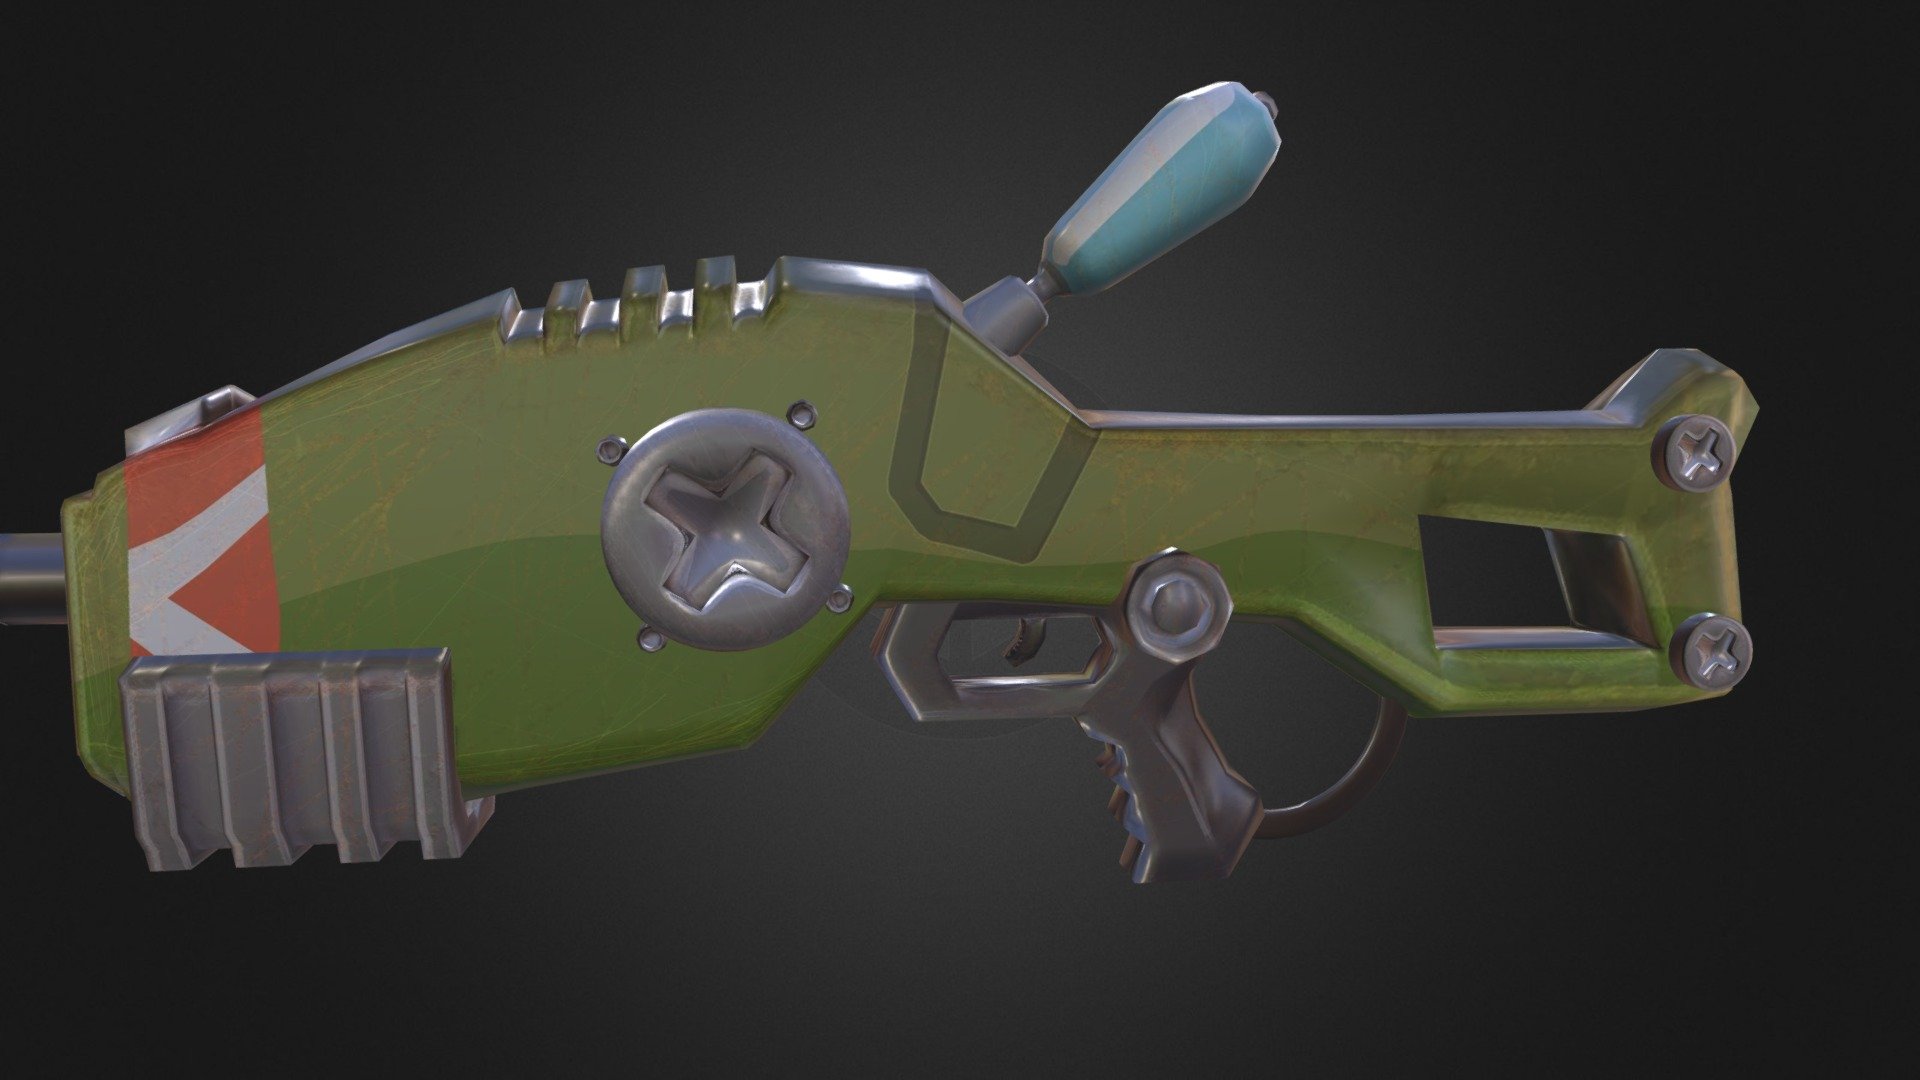 Made in Blender, Textured in Photoshop + NDO2
Original Concept by Matias Hannecke :) - MatHanOne Gun - 3D model by led2012 3d model